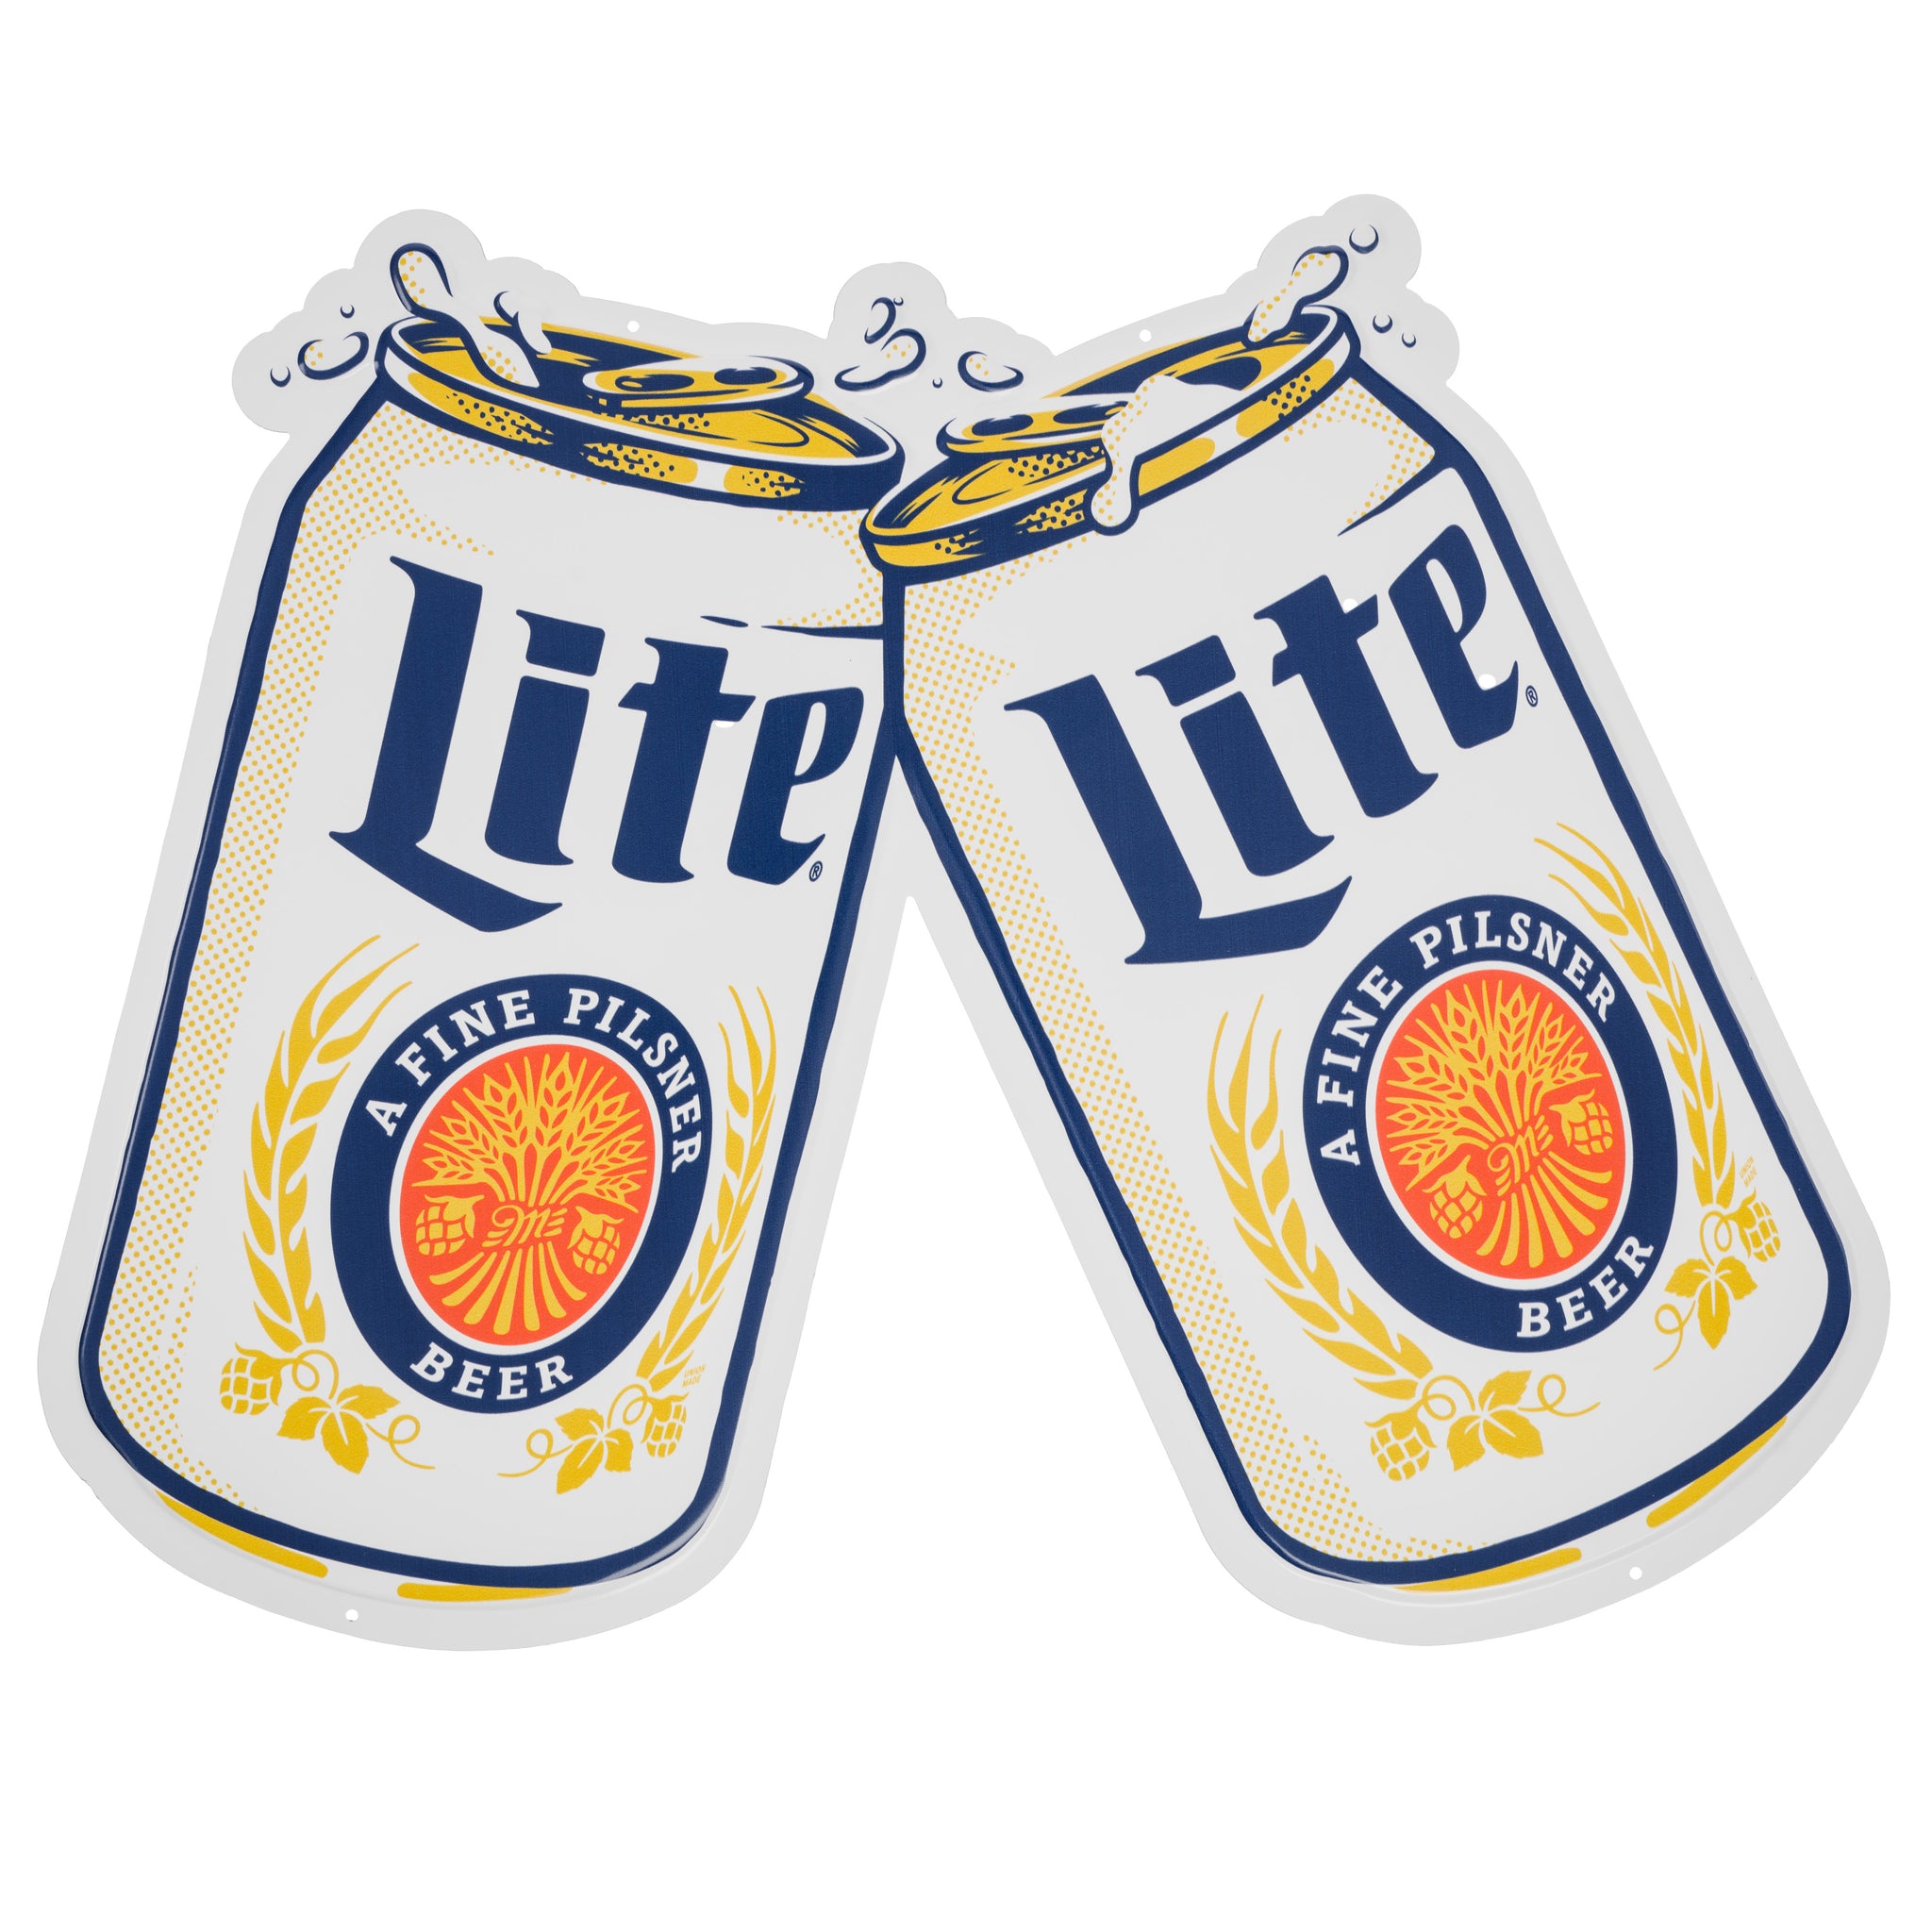 LITE CHEERSING CANS CUTOUT METAL SIGN